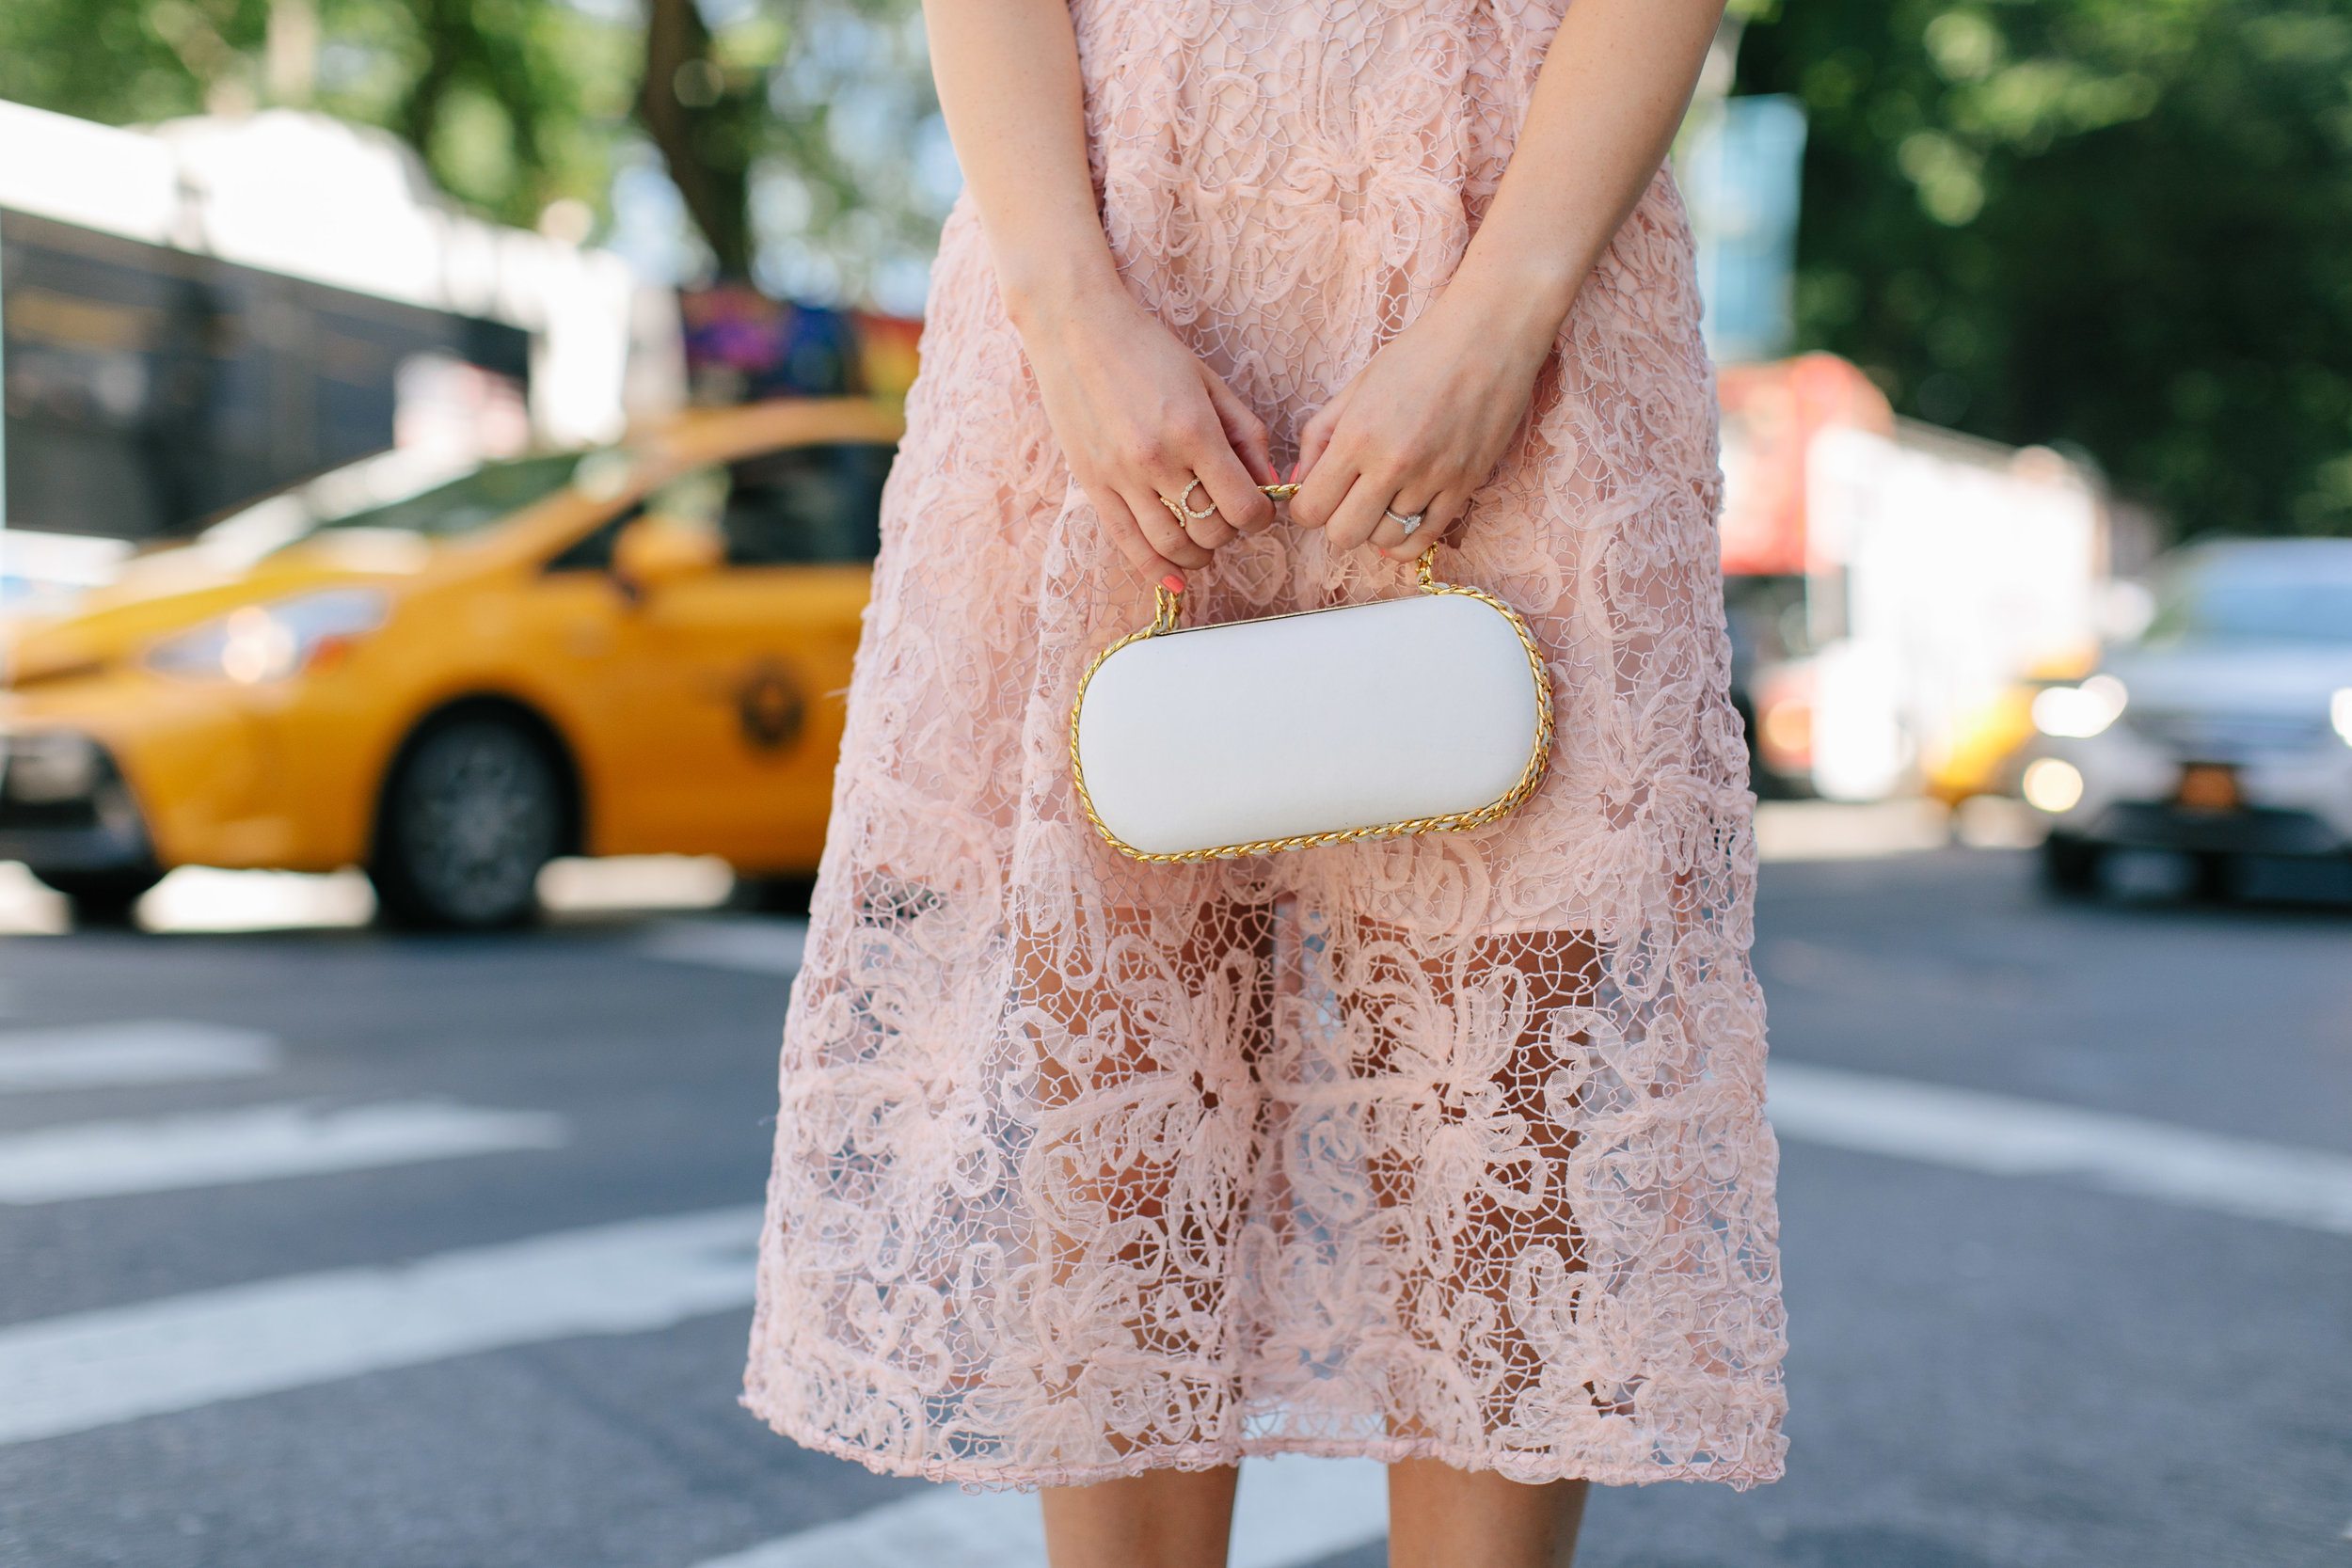 A New Perspective On Instagram Jealousy Pink Lace Dress Ivory Bow Heels Esther Santer Fashion Blog NYC Street Style Blogger Outfit OOTD Trendy Formal White Bag Clutch Self Portrait Designer Kate Spade Wear Wedding Shoes Fancy Elegant Feminine Shopping.jpg